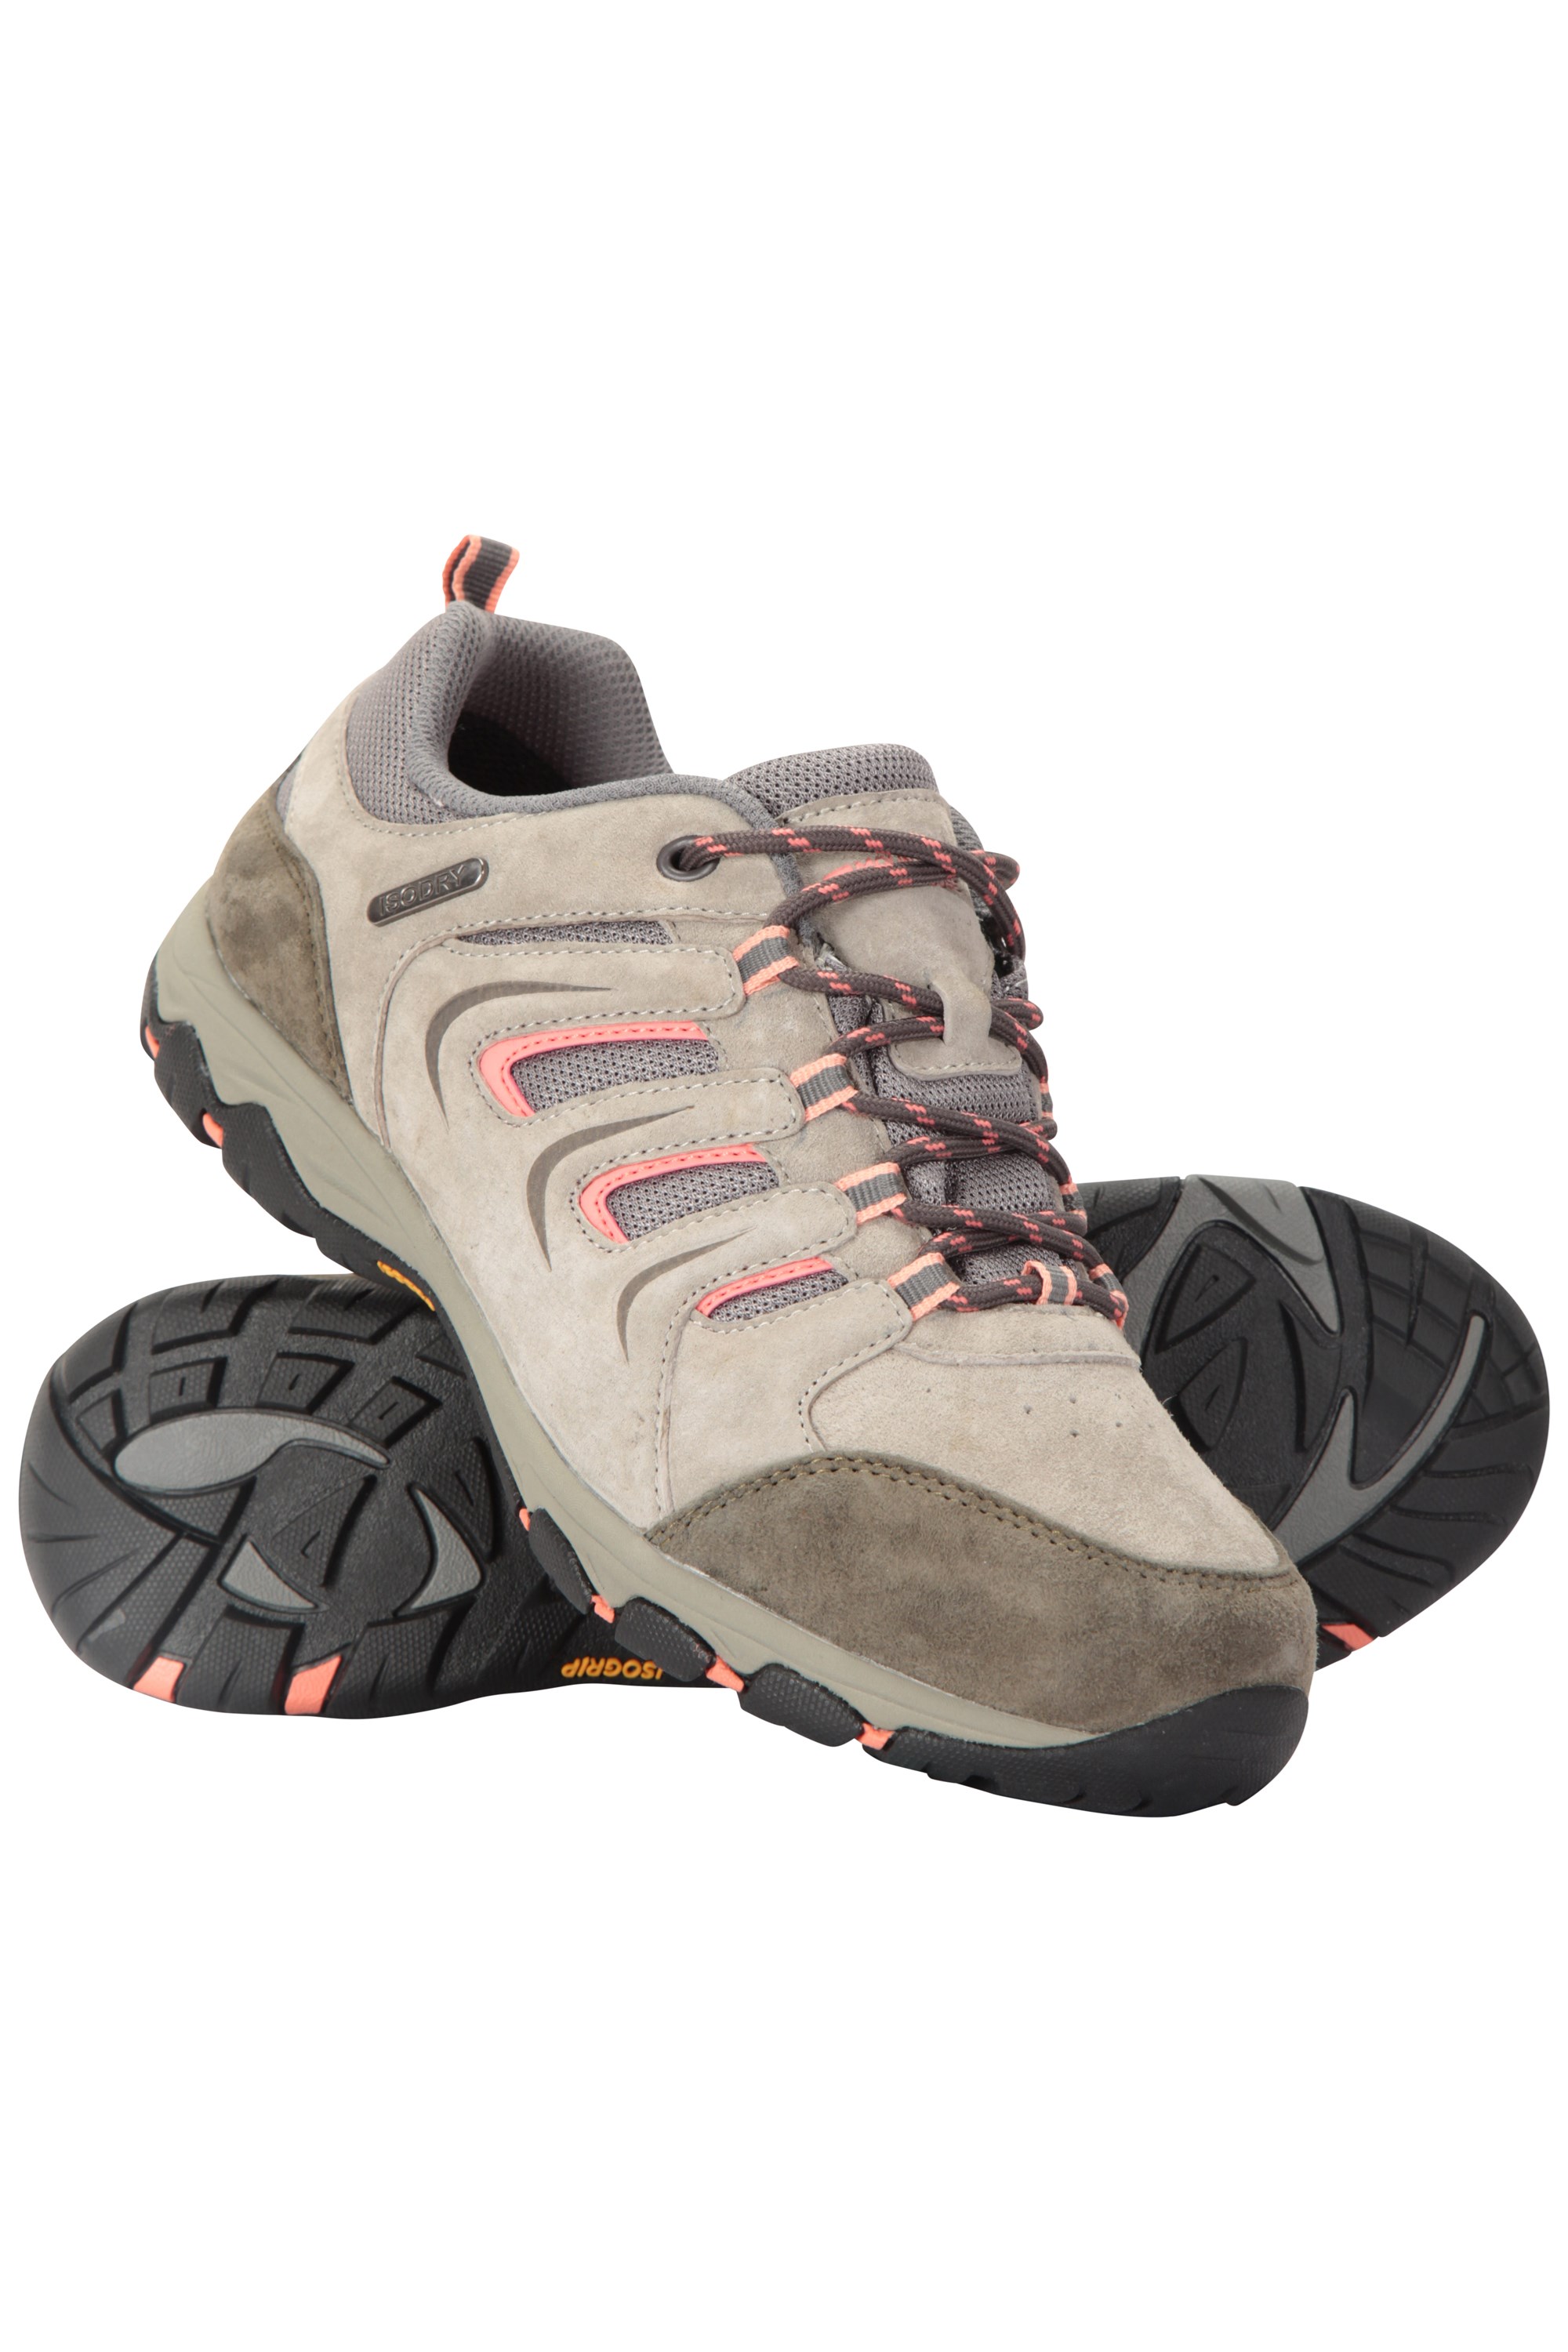 aspect isogrip mens waterproof shoes